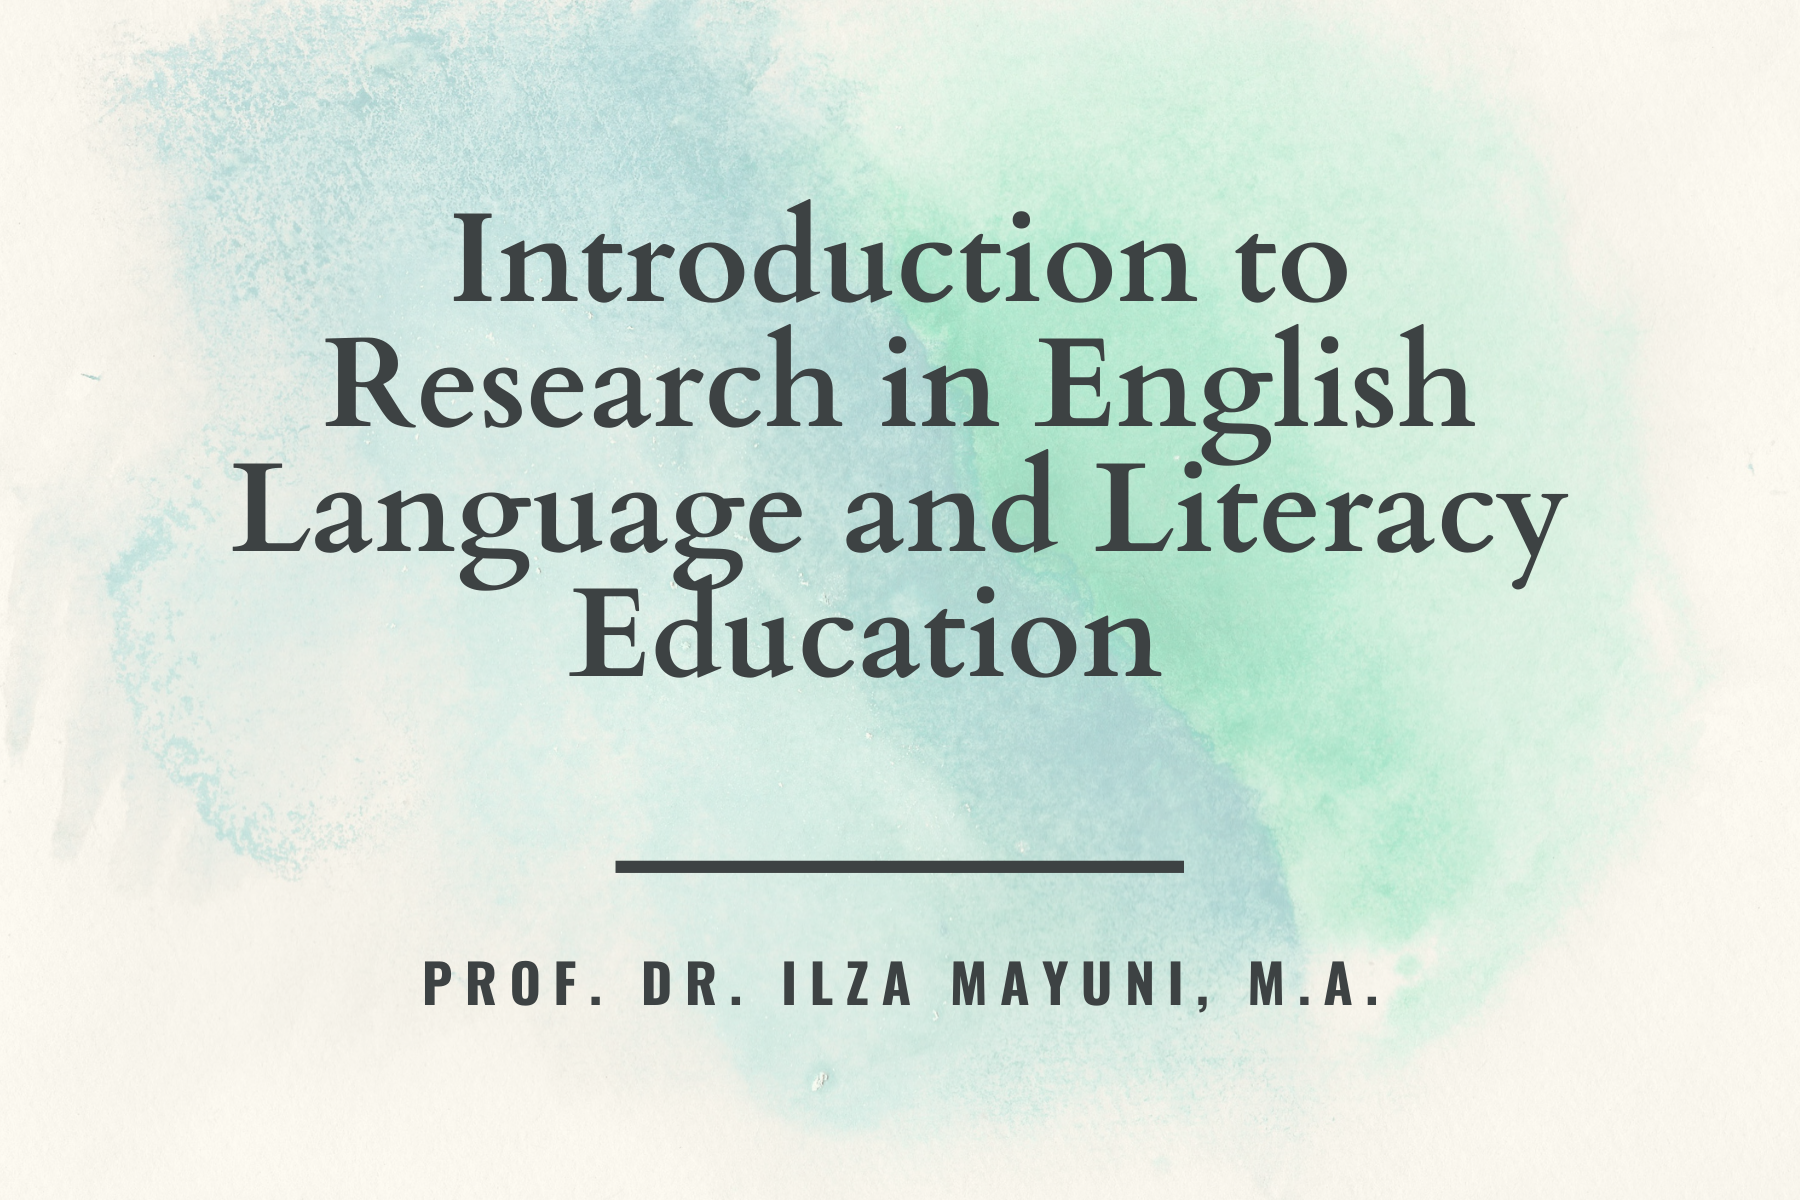 Introduction to Research in English Language and Literacy Education 19B